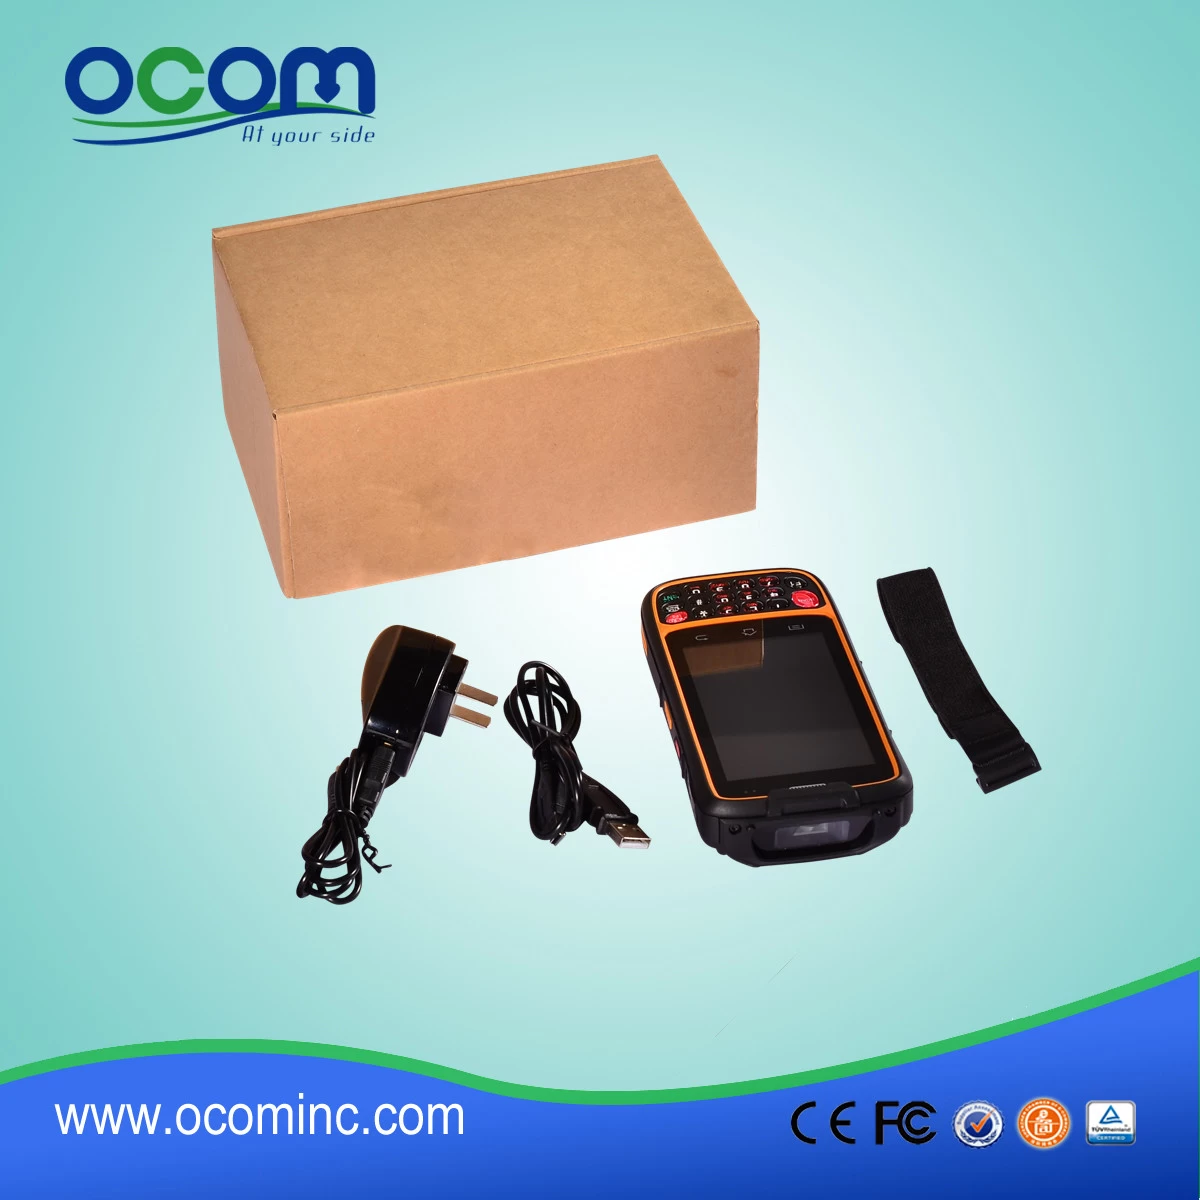 (OCBS-D7000) 4" Handheld Android 7.0  Industrial Data Terminal